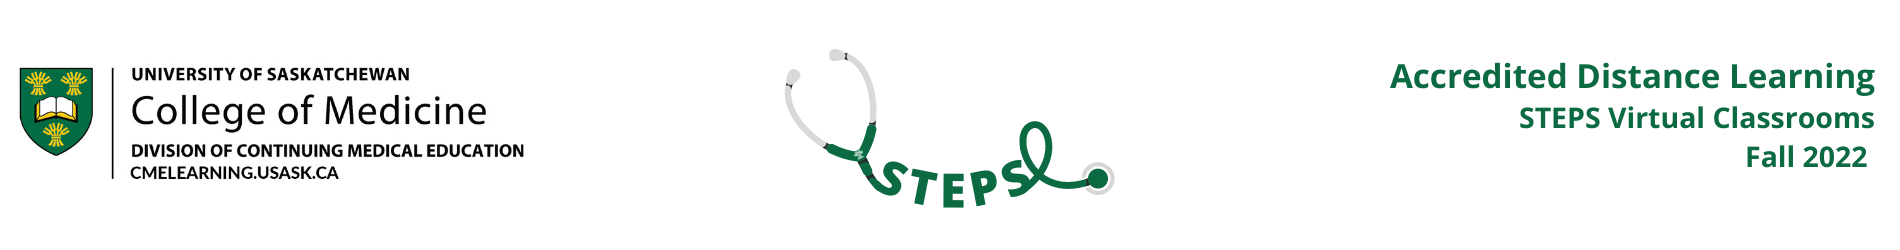 steps-sub-banner-1.png